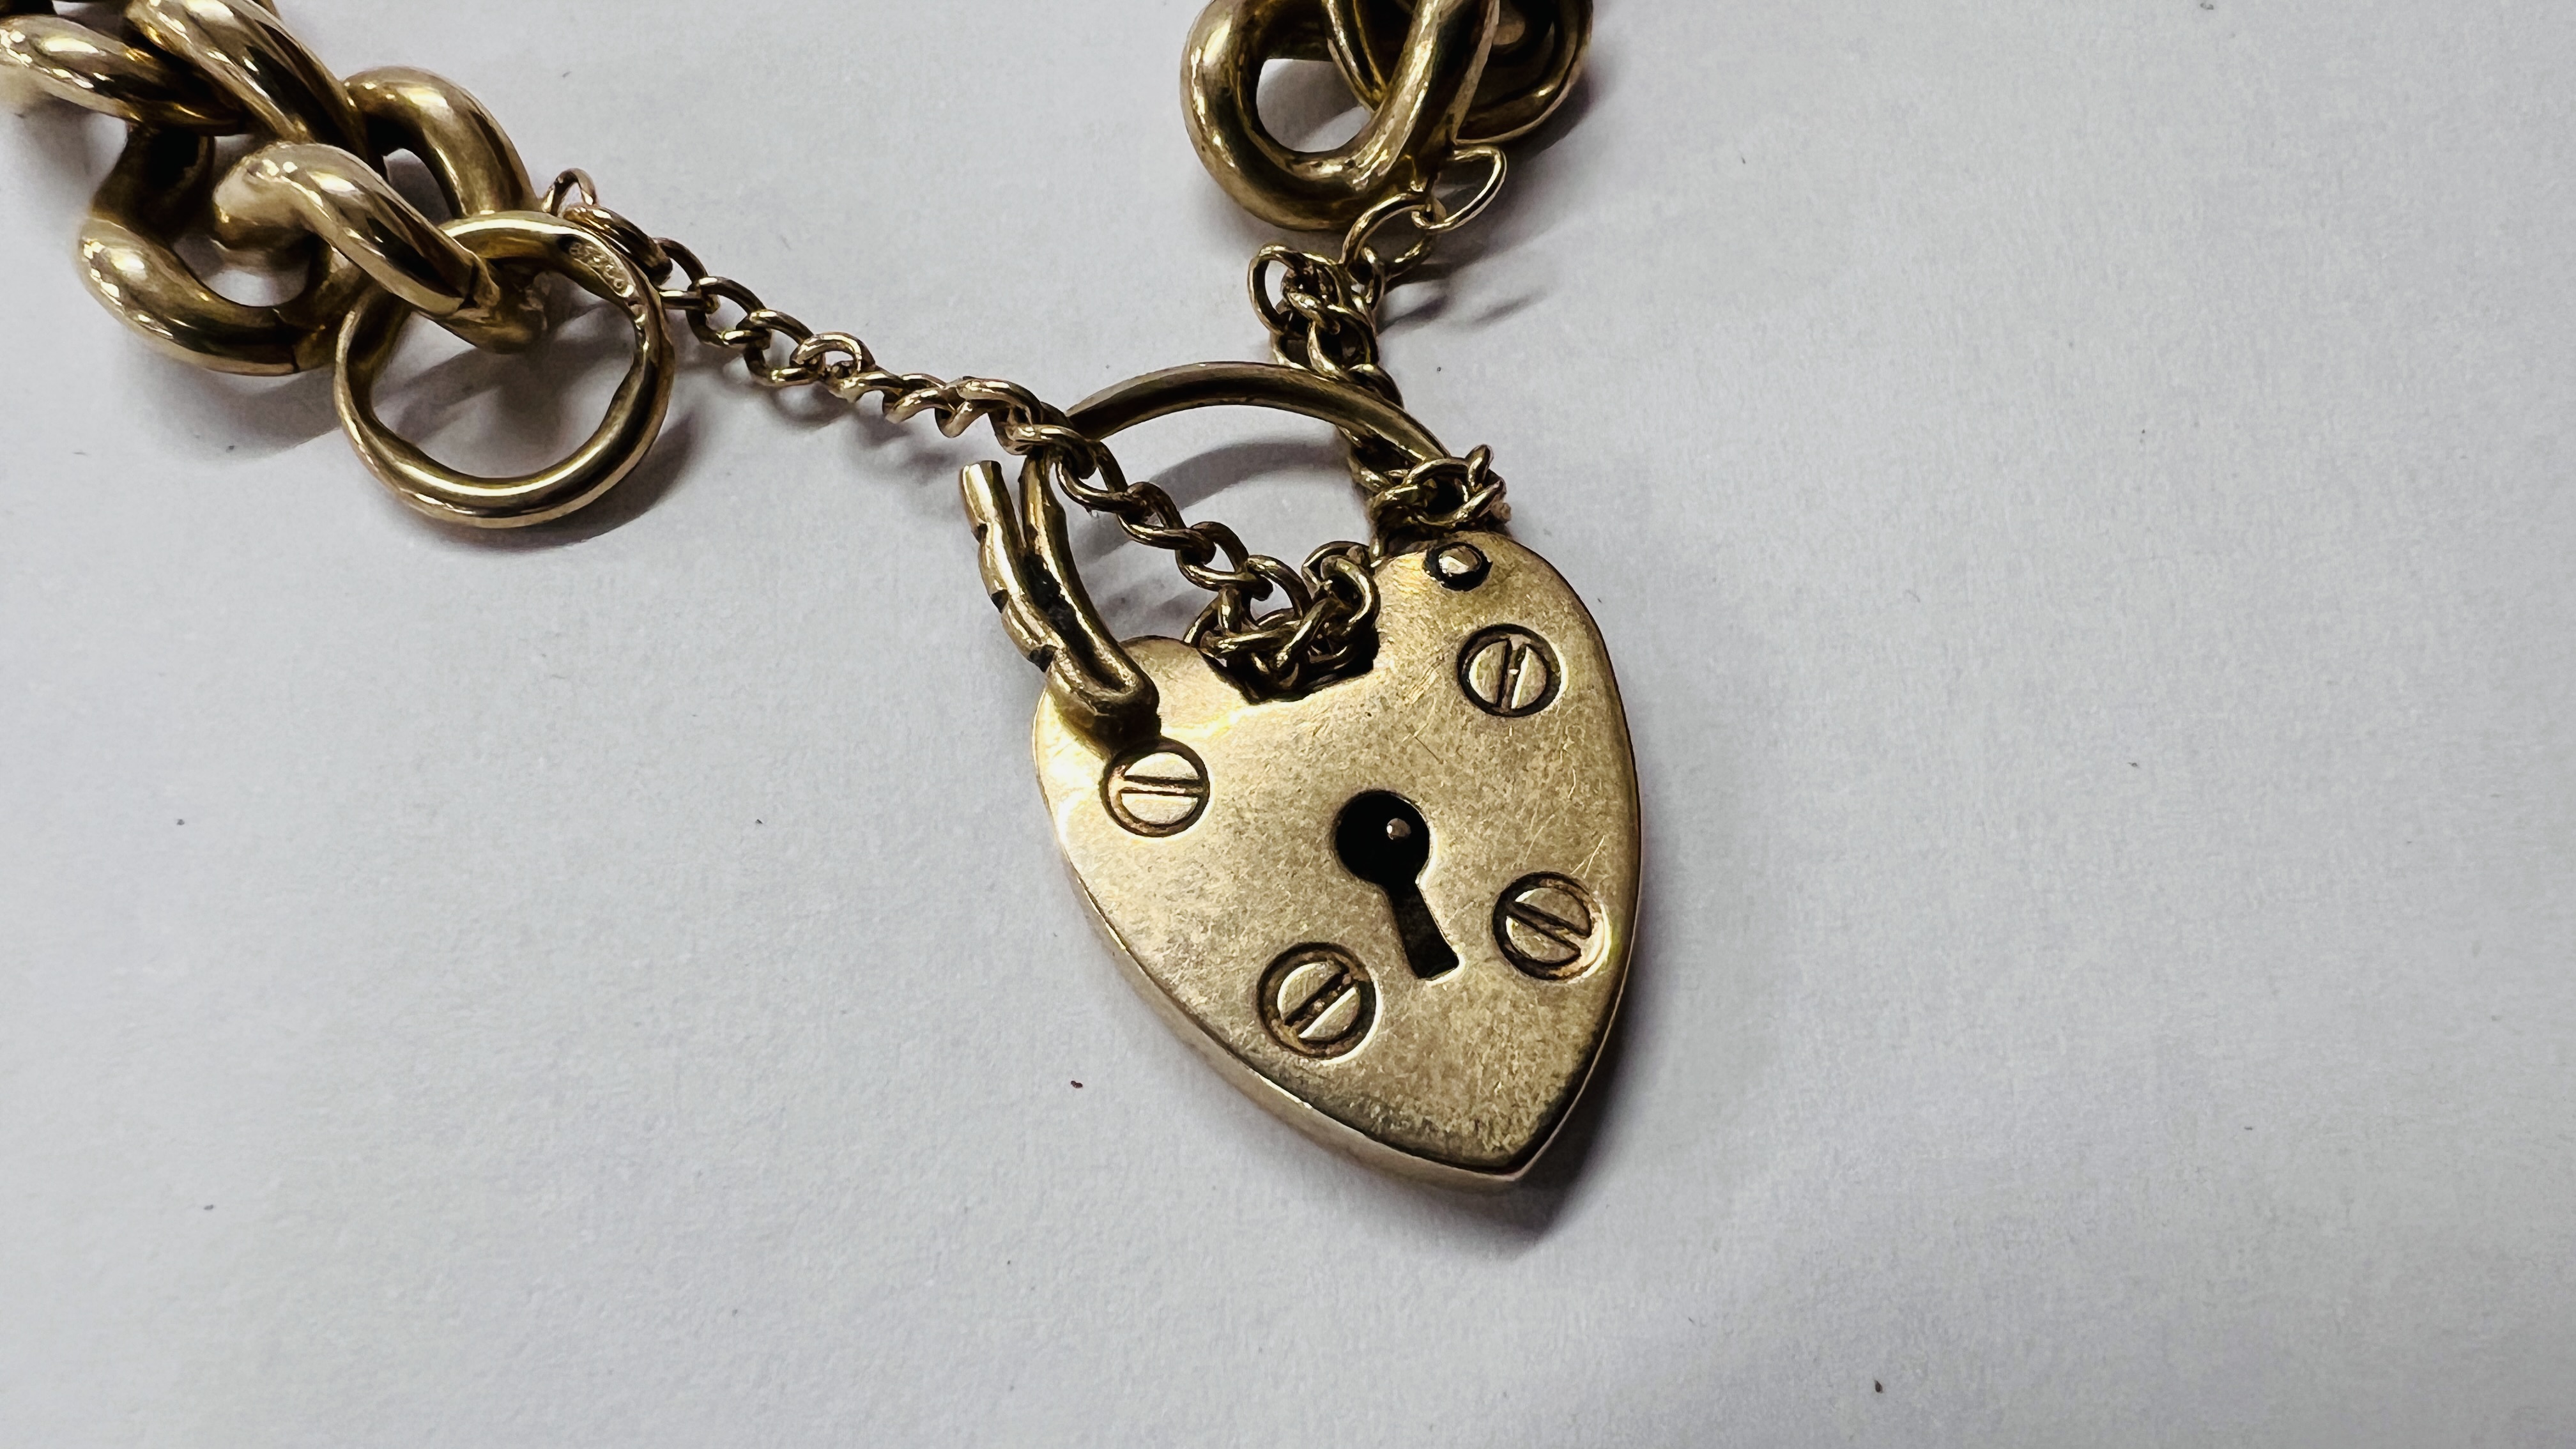 A 9CT GOLD BRACELET WITH PADLOCK CLASP. - Image 2 of 8